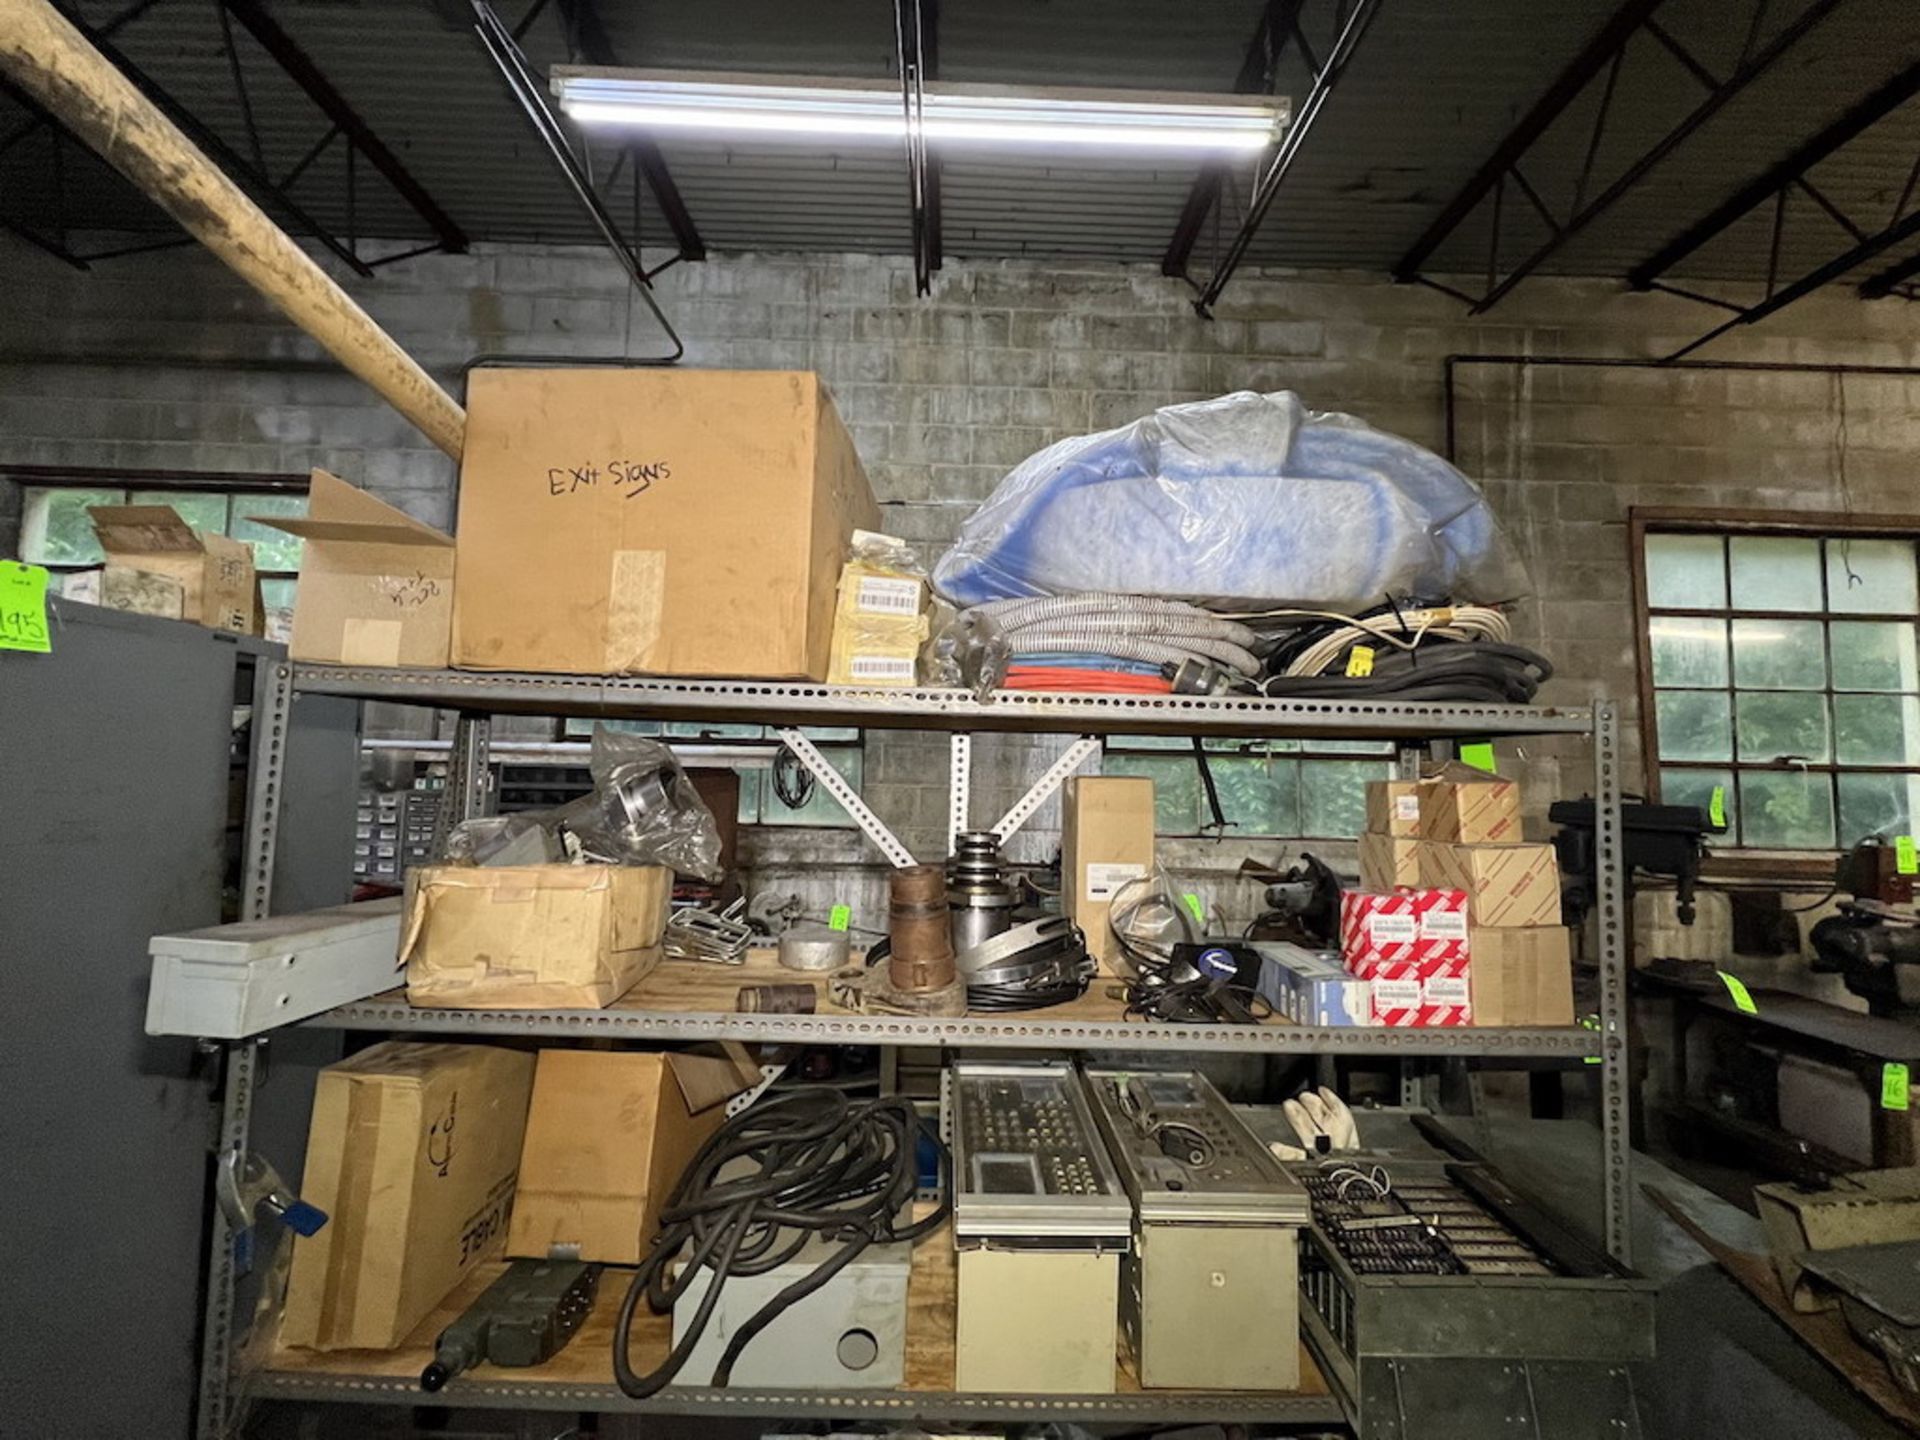 Remaining Contents of Parts Room - Image 49 of 60